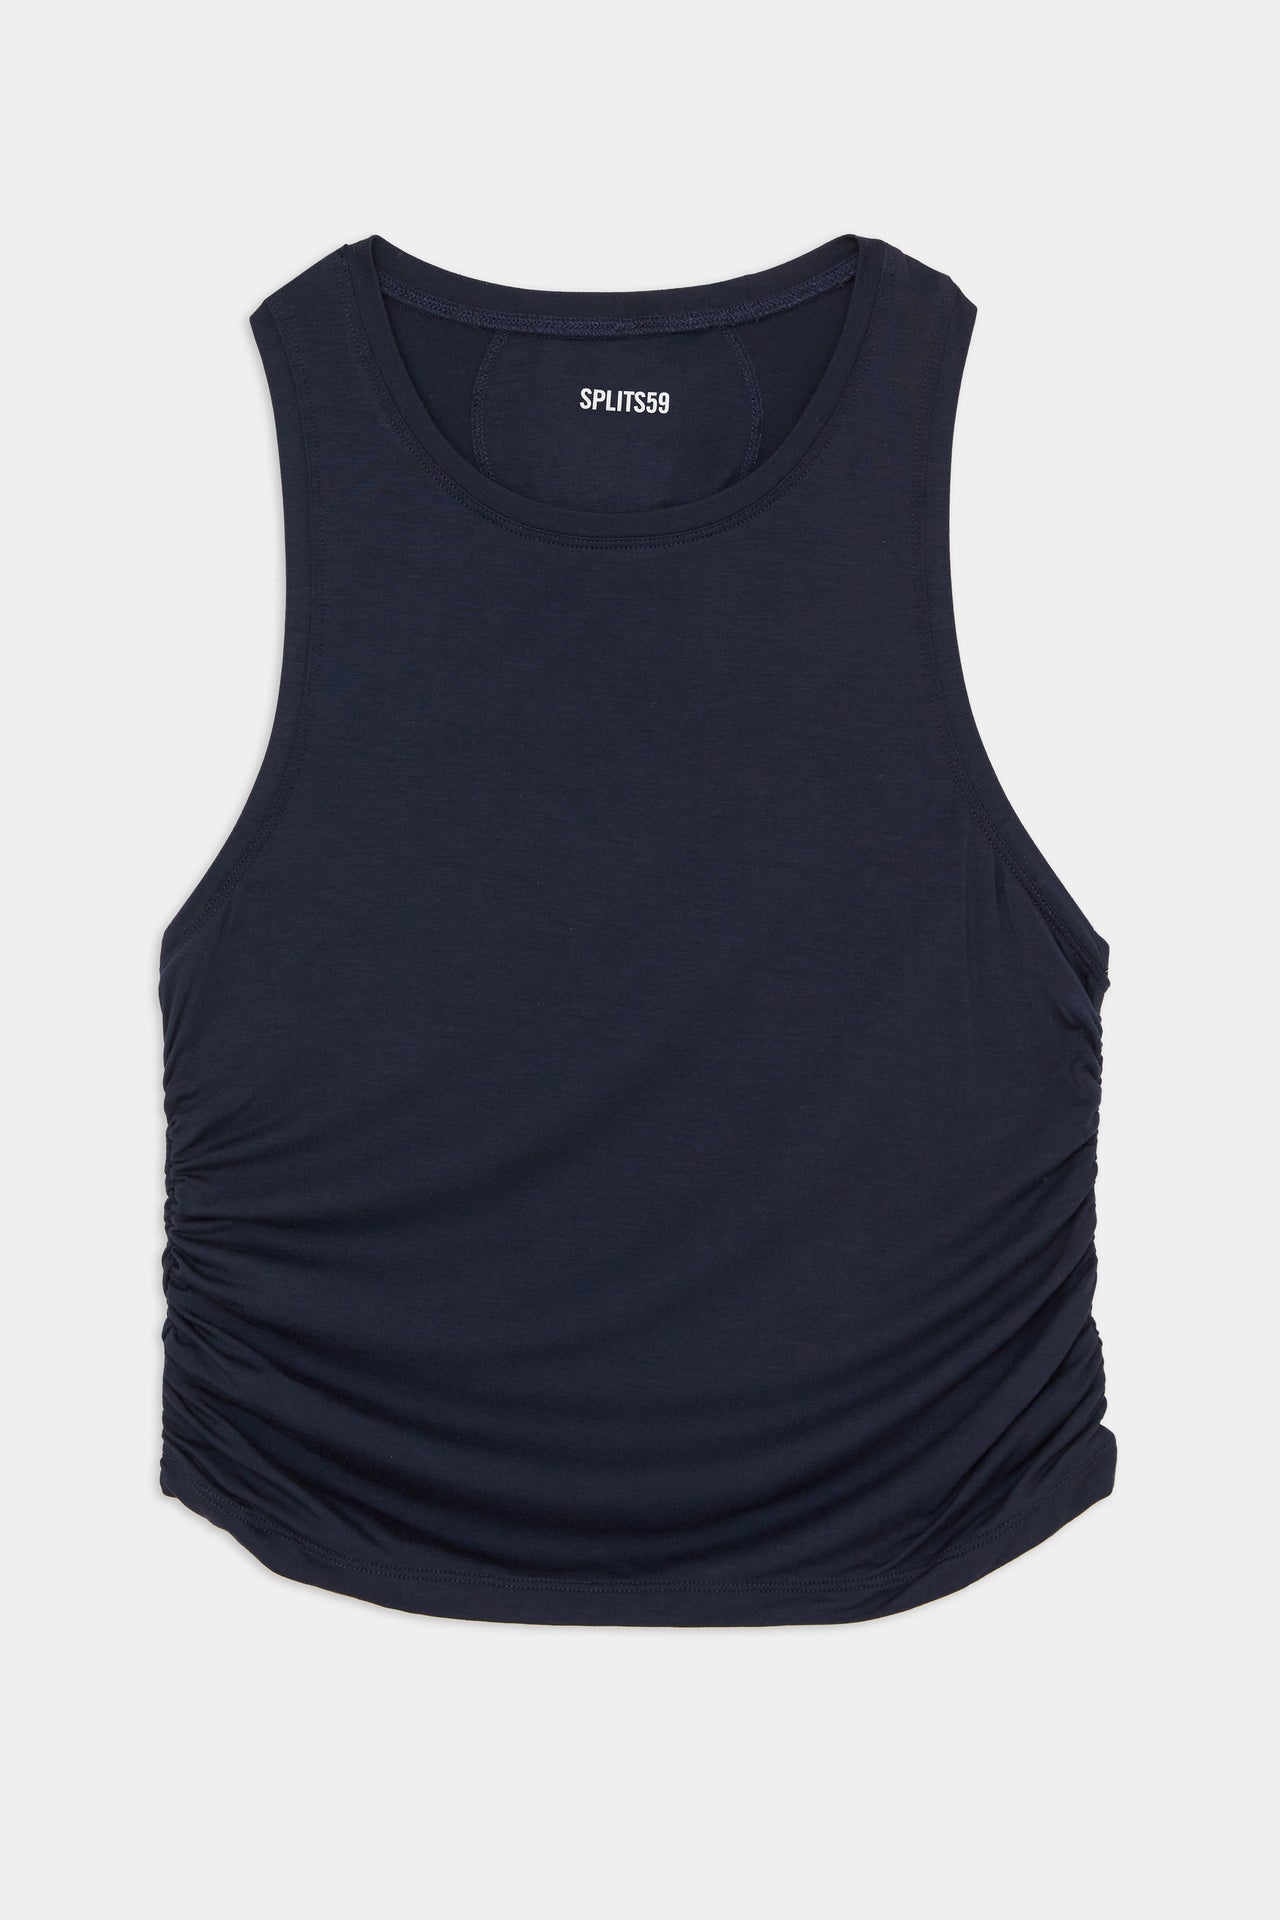 A cropped tank top with a ruched neckline, perfect for gym workouts. Try the Frida Jersey Tank in Indigo by SPLITS59.